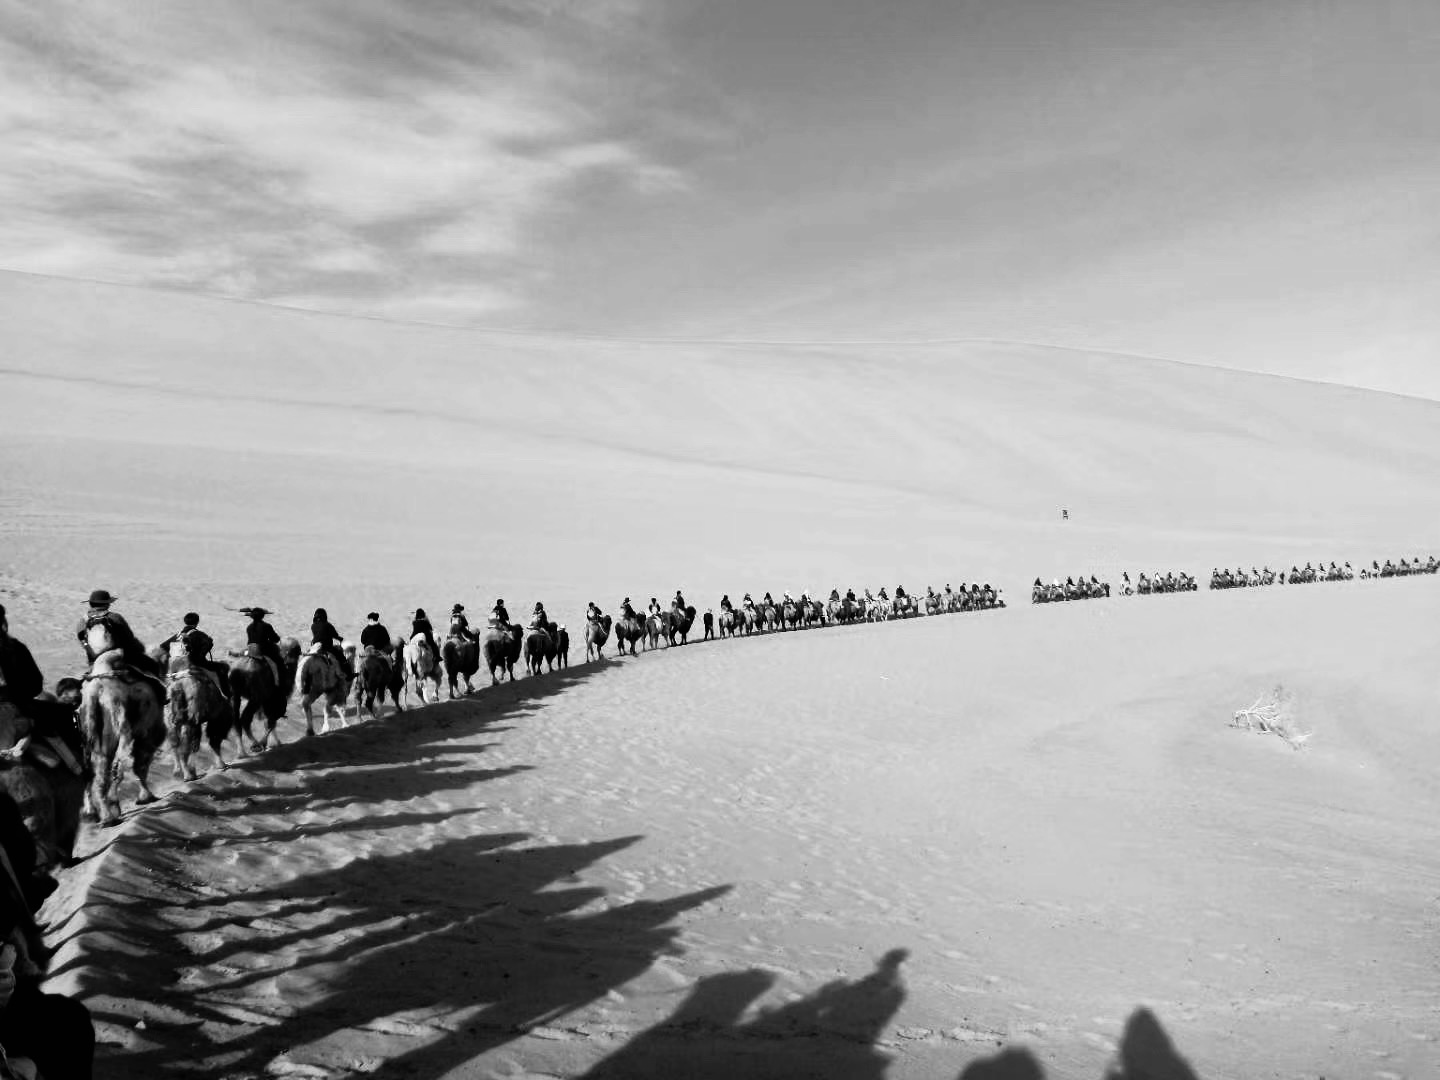 Black and white image of a row of people on camels in the desert.